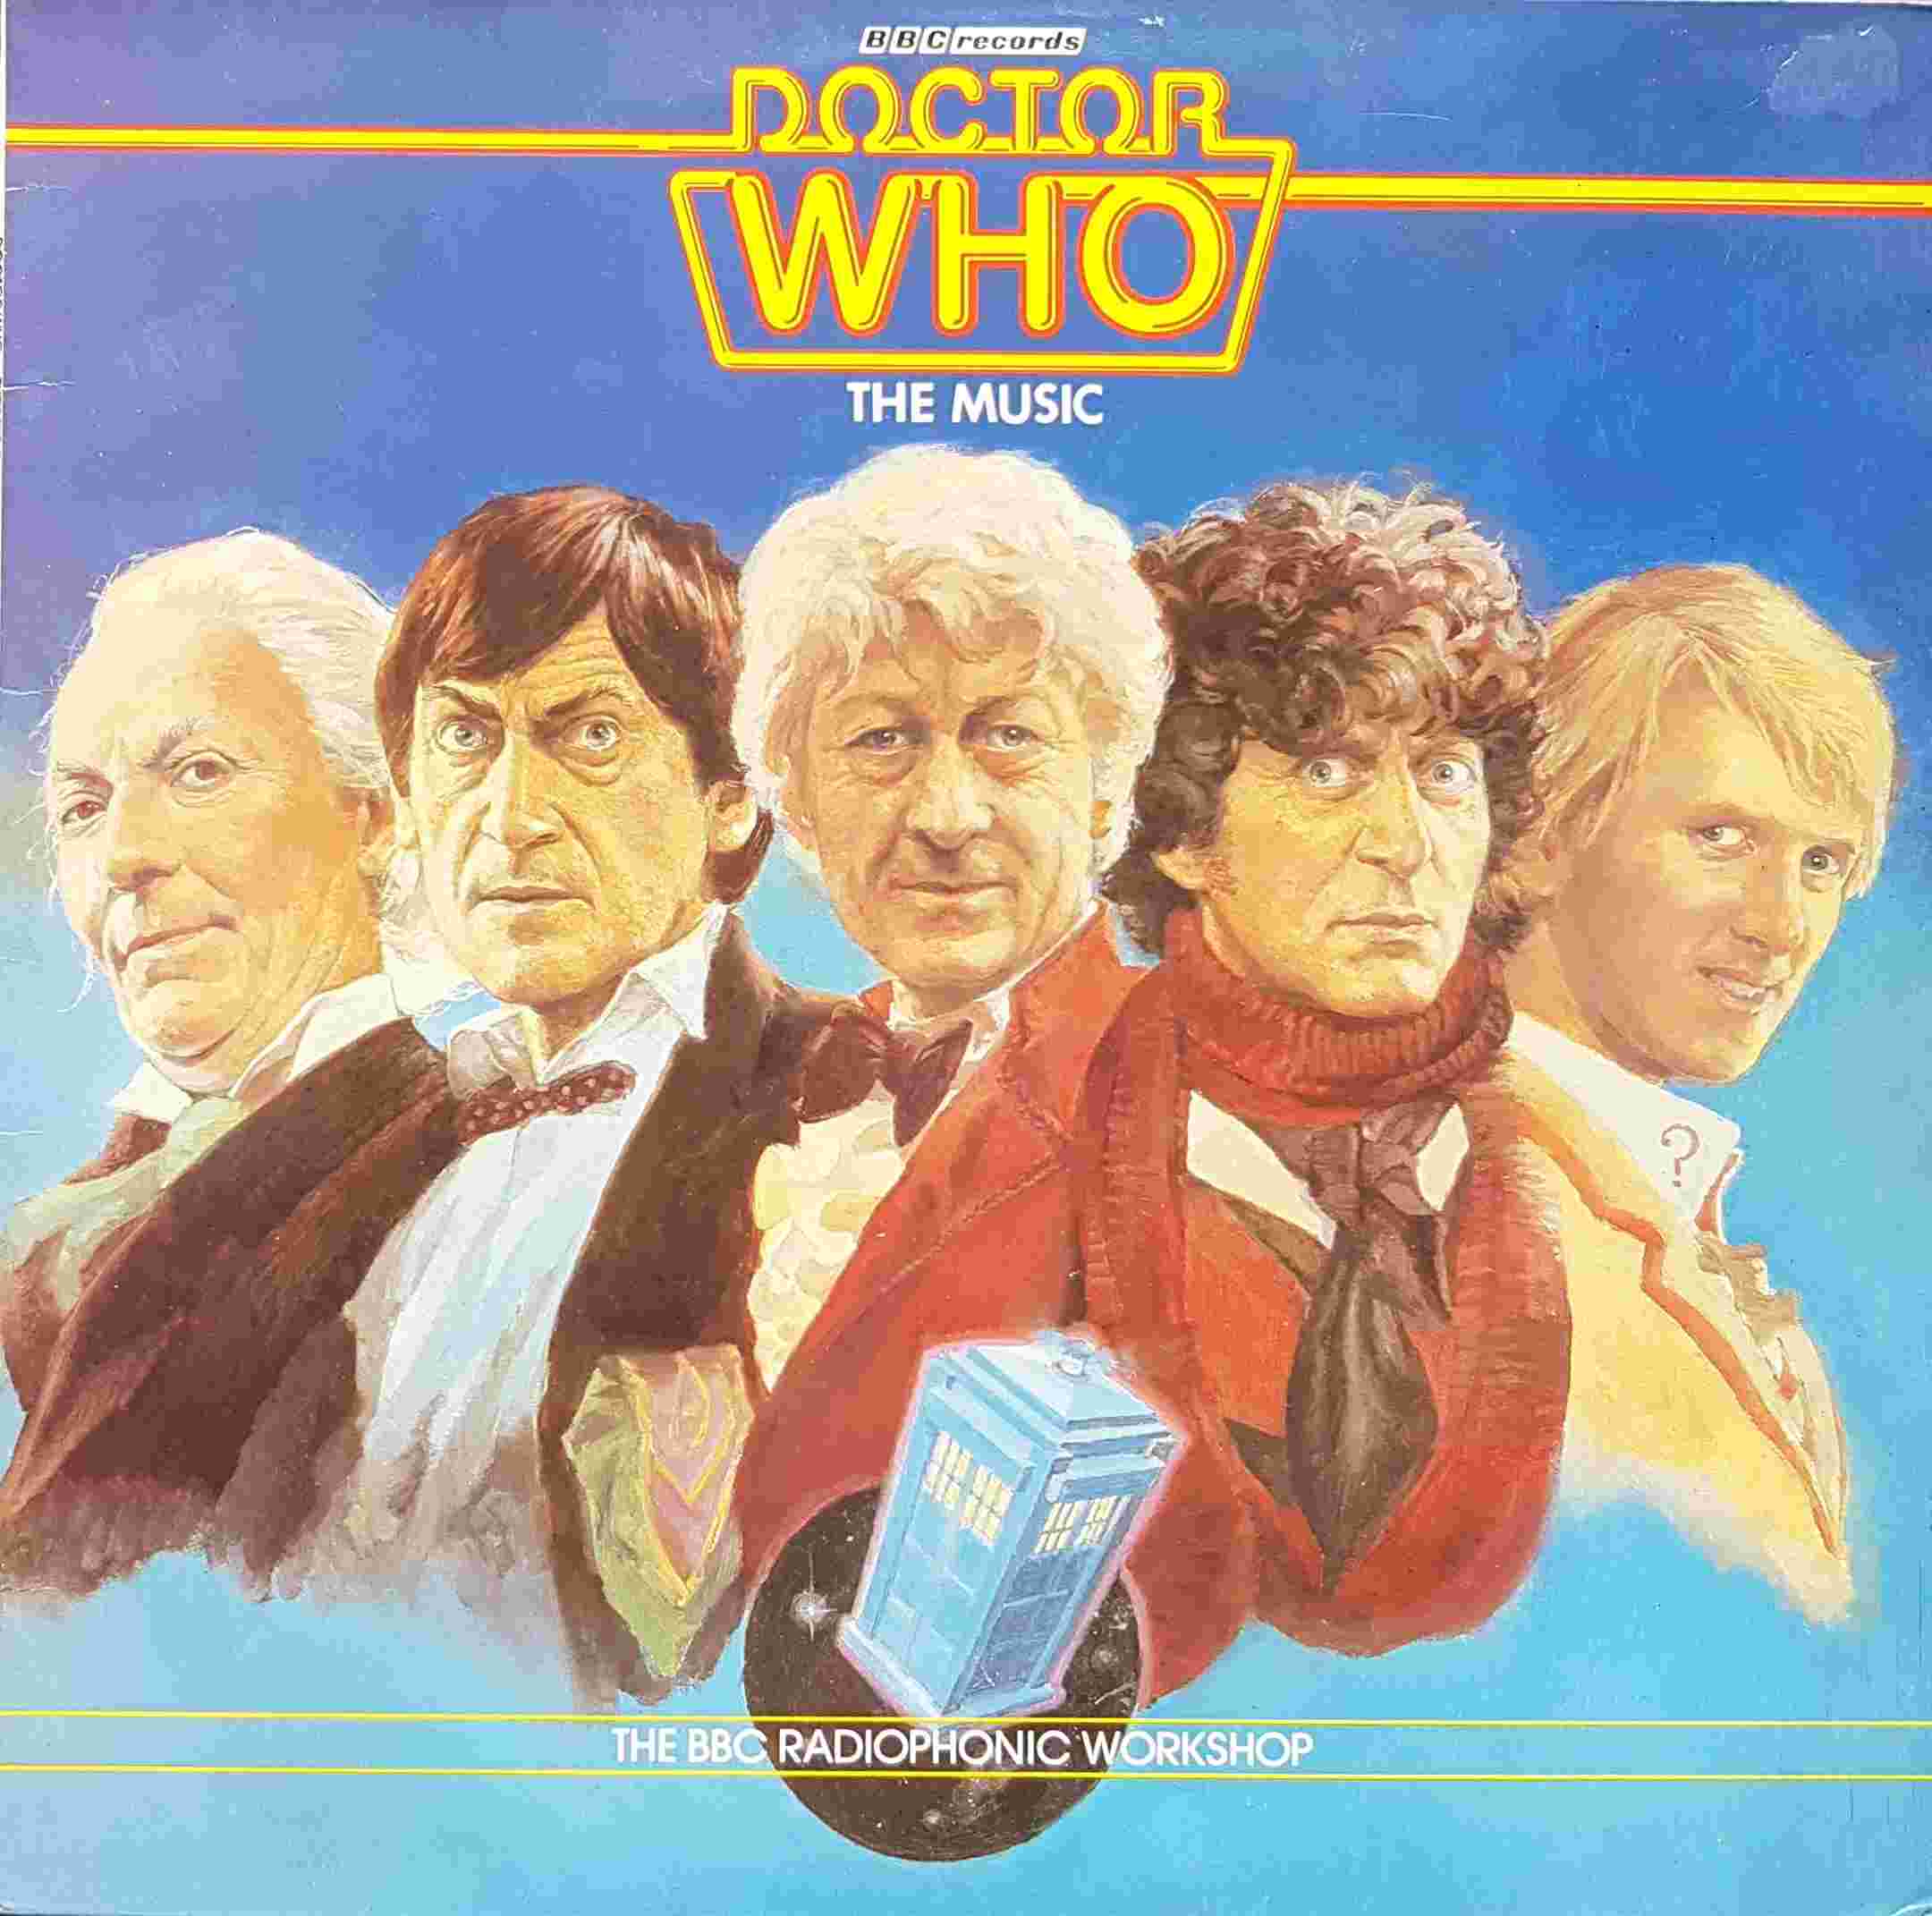 Picture of REH 462 Doctor Who - The music by artist Various from the BBC albums - Records and Tapes library